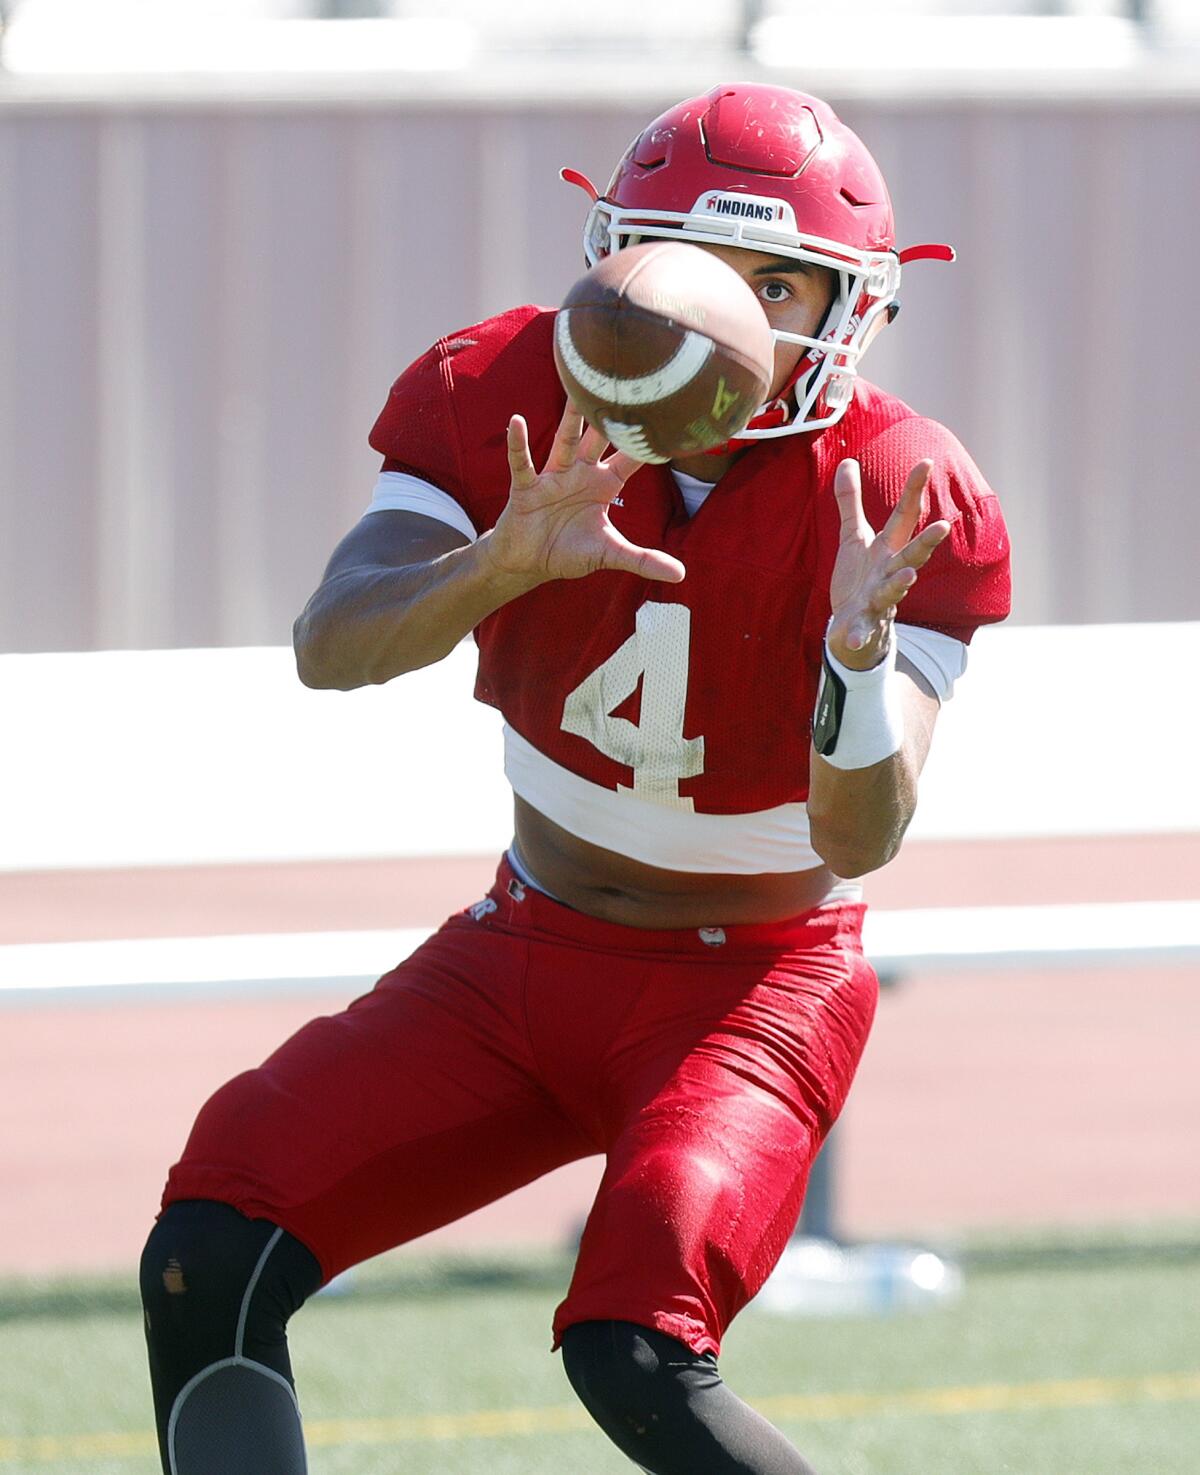 Burroughs' Ellington Simmons brings in a pass during a passing drill at football practice at Burroughs High School in Burbank on Tuesday, August 13, 2019.